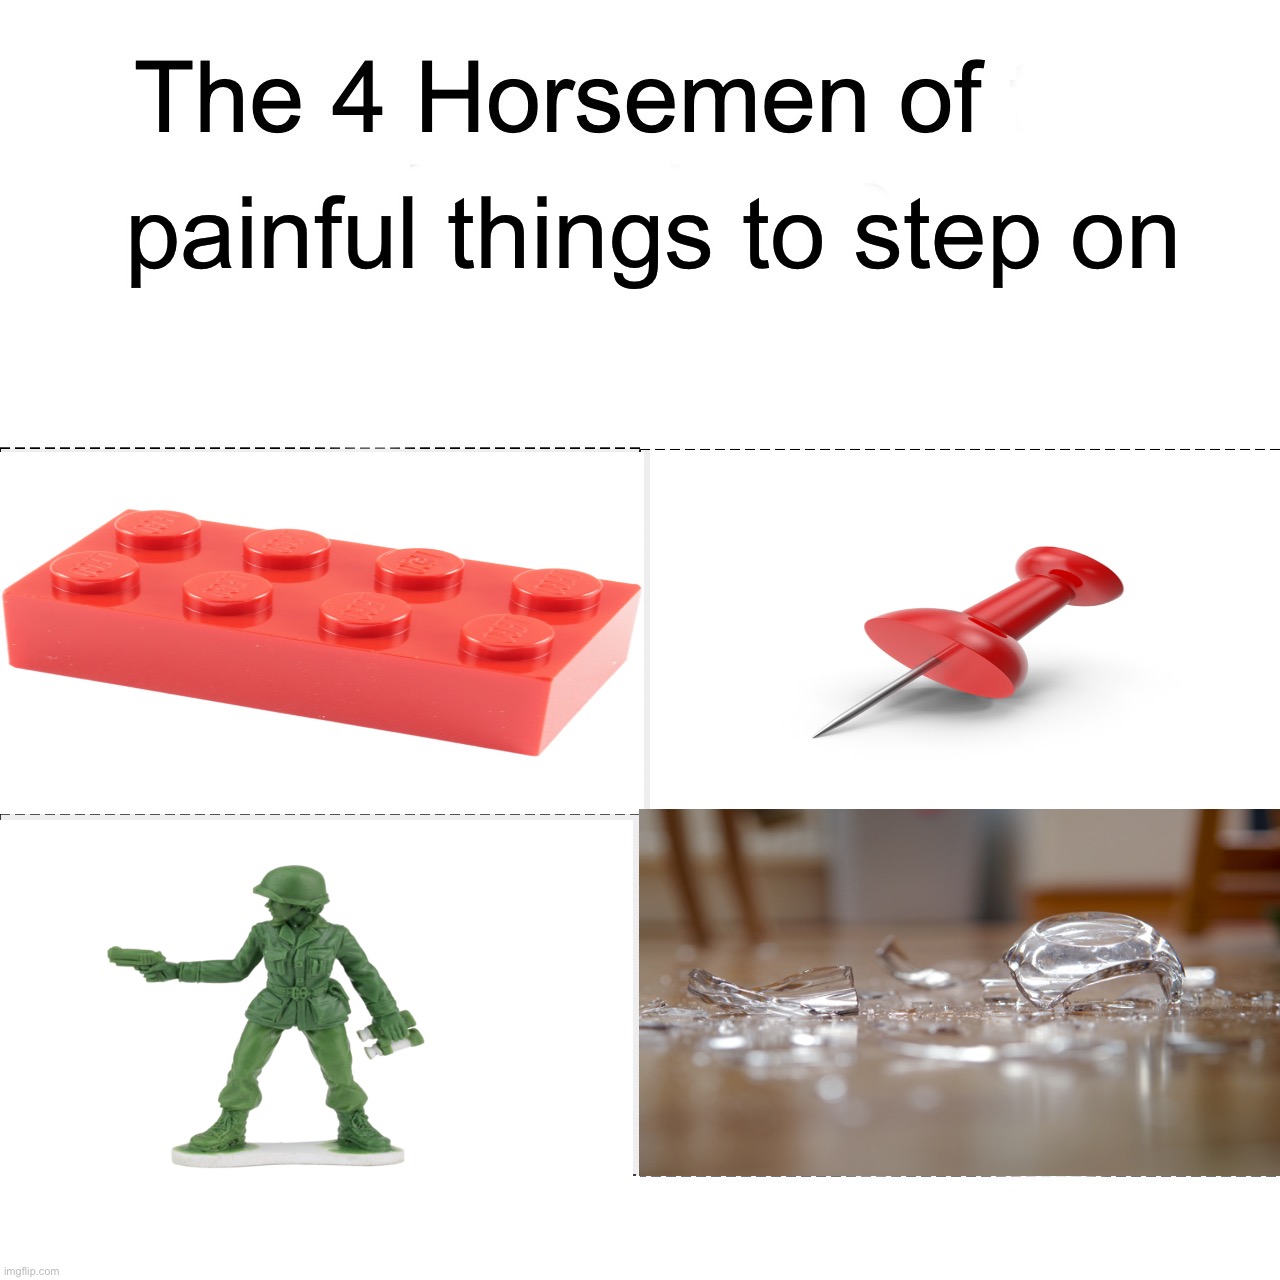 Why is this true |  painful things to step on | image tagged in four horsemen,memes,funny,lego,thumbtack,glass | made w/ Imgflip meme maker